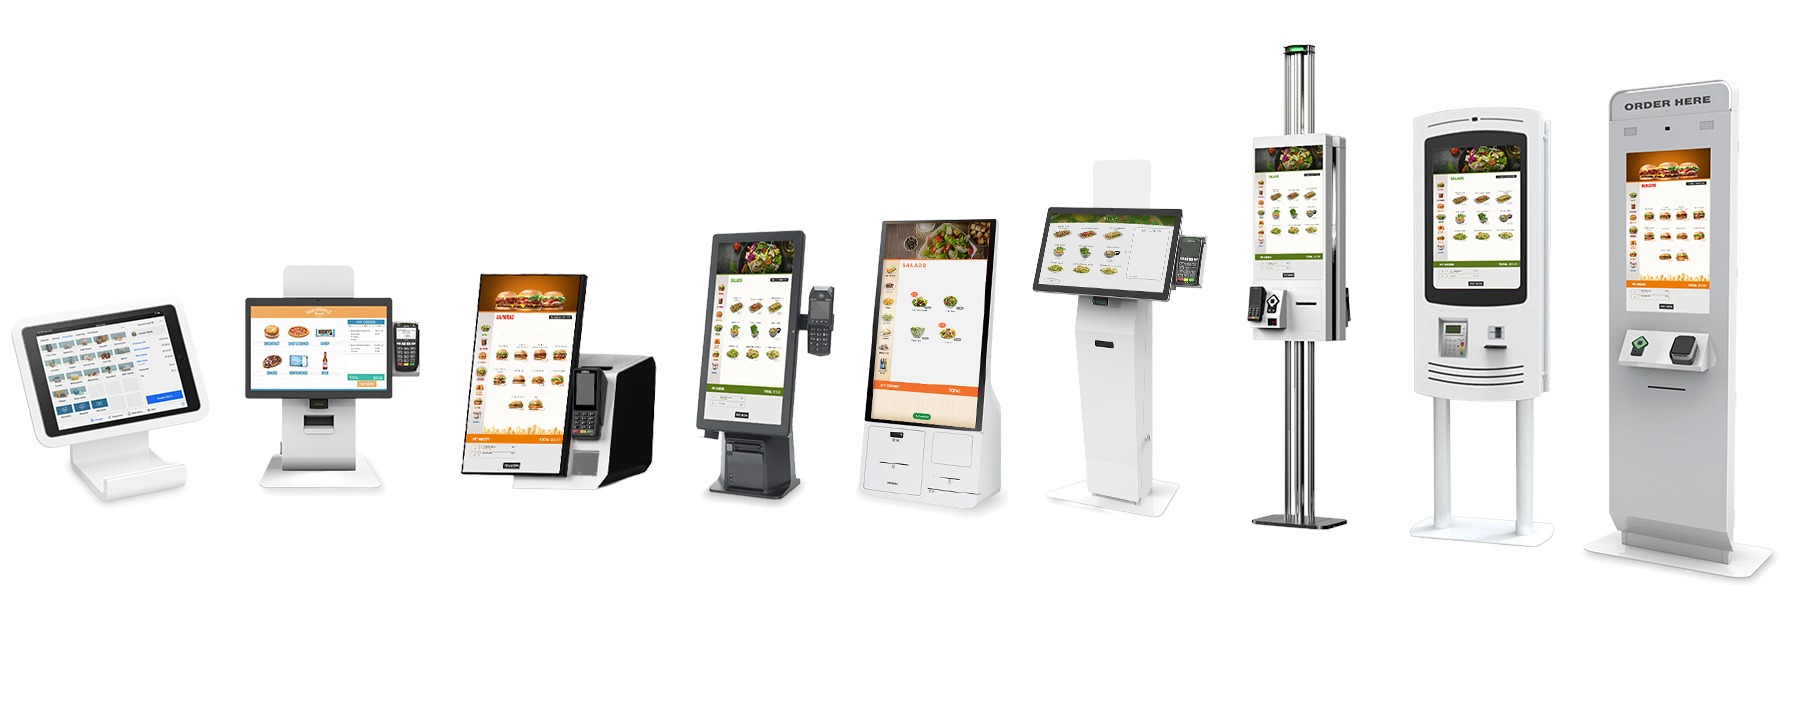 XPR Offers Wide Variety of Kiosk Options